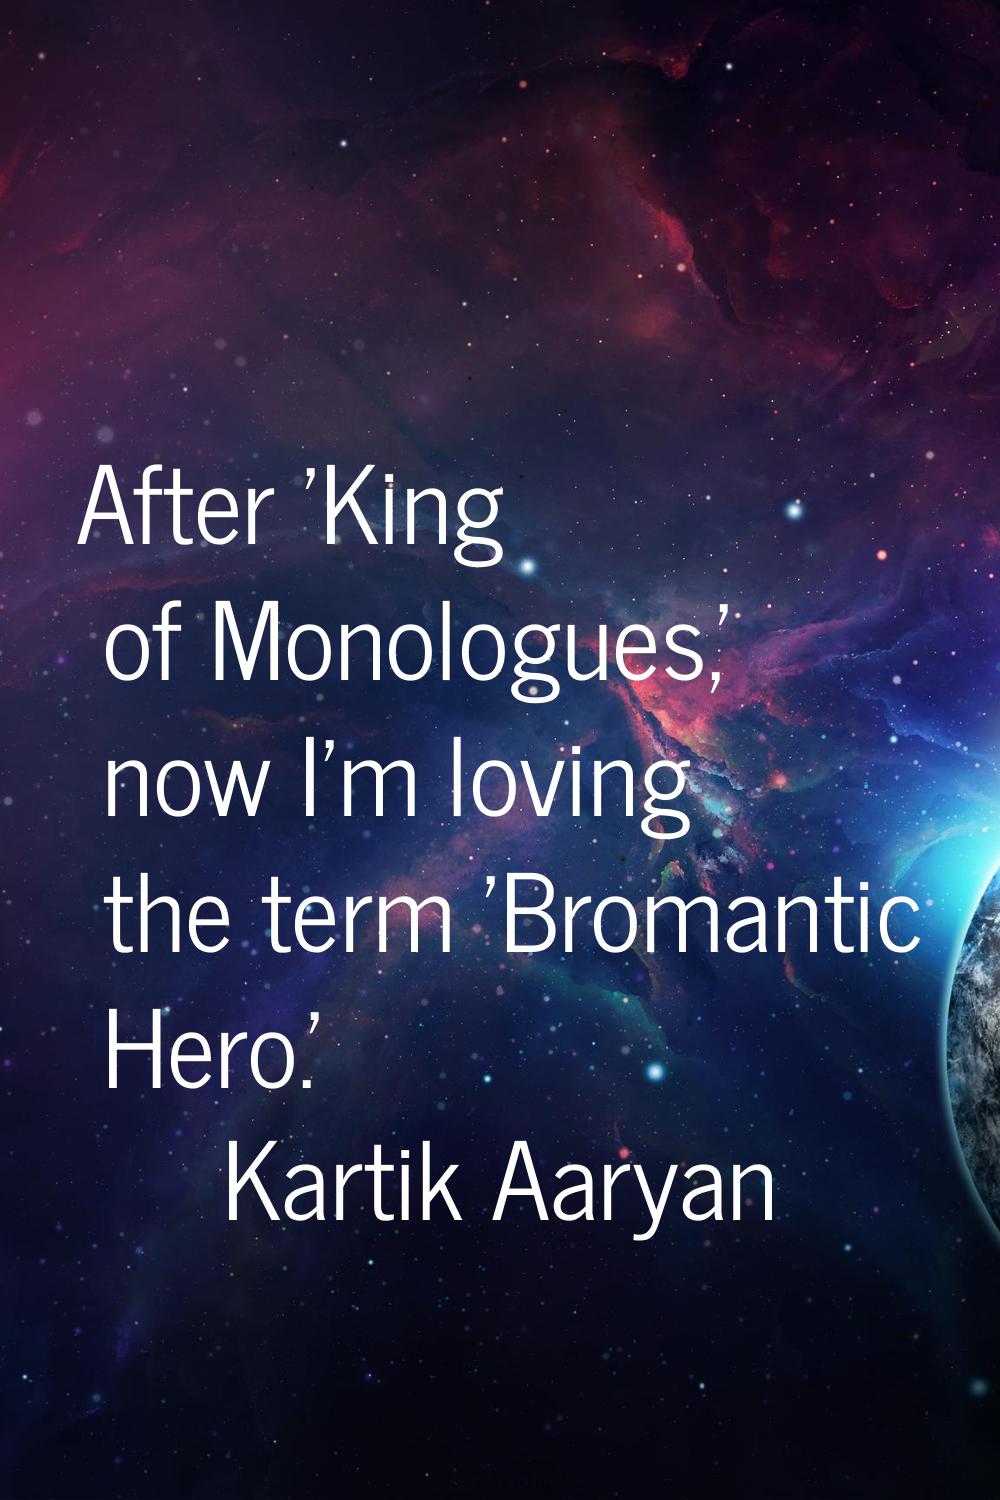 After 'King of Monologues,' now I'm loving the term 'Bromantic Hero.'